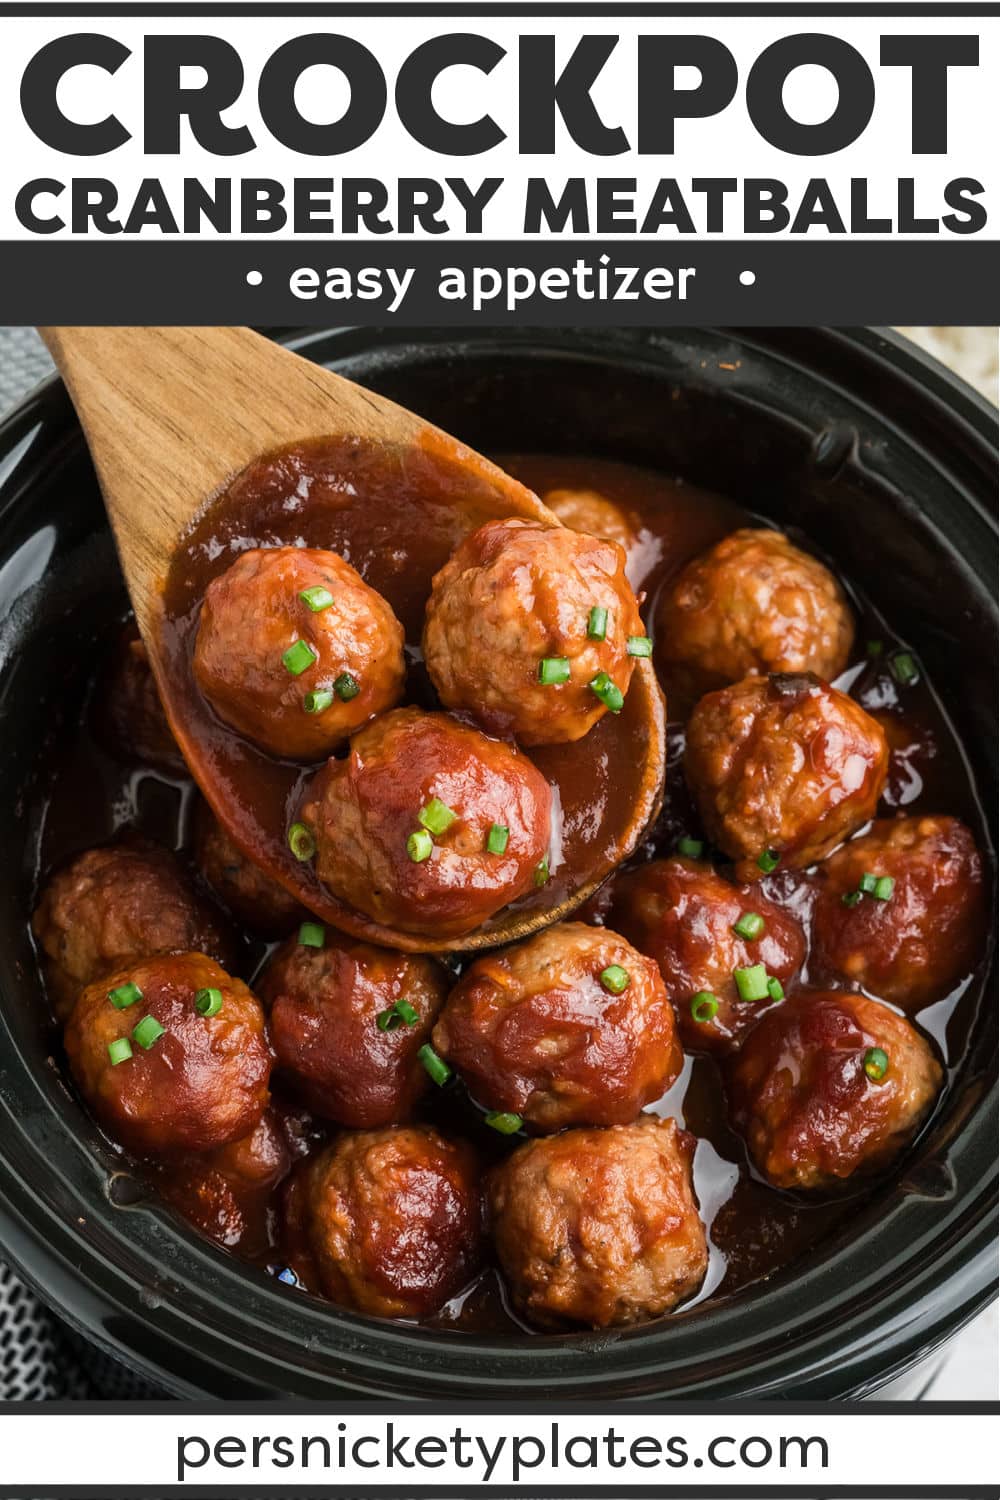 Cranberry meatballs are sweet and tangy and bursting with flavor. It’s easier than ever to make these sweet and zesty meatballs in the slow cooker, with a sauce that takes them to the next level. | www.persnicketyplates.com